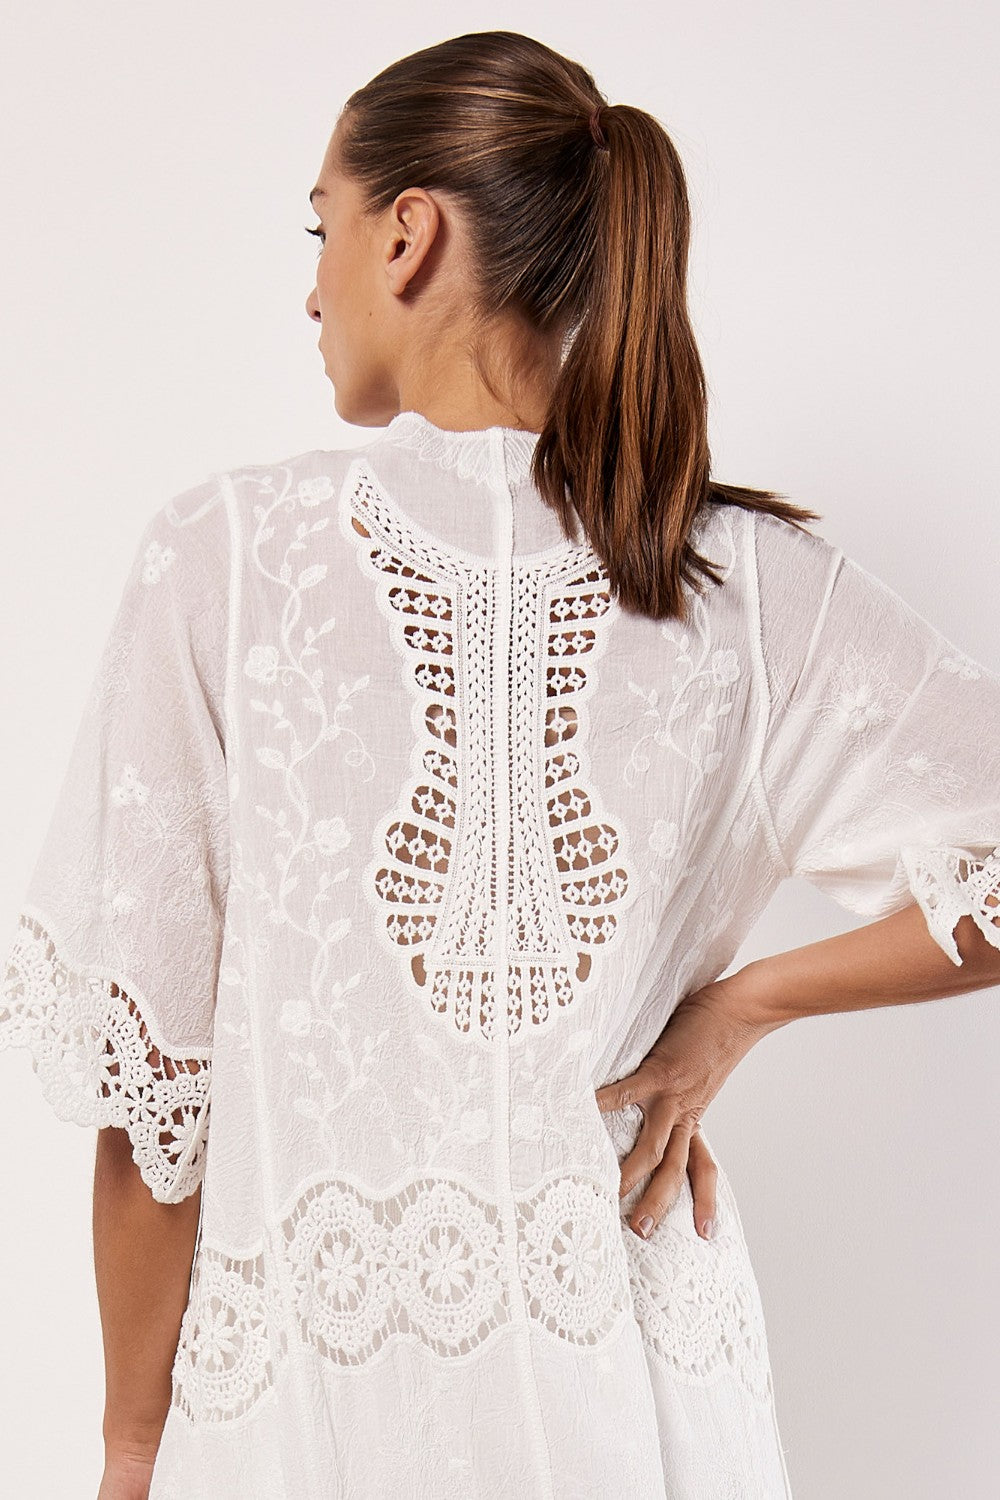 Pattern: Lace Collar: Collarless Sleeve Length: Half sleeve Neckline: Open Fastening: Tie-waist Fit: Relaxed Sleeve Details: Wide armholes Upper Part Details: Oversized